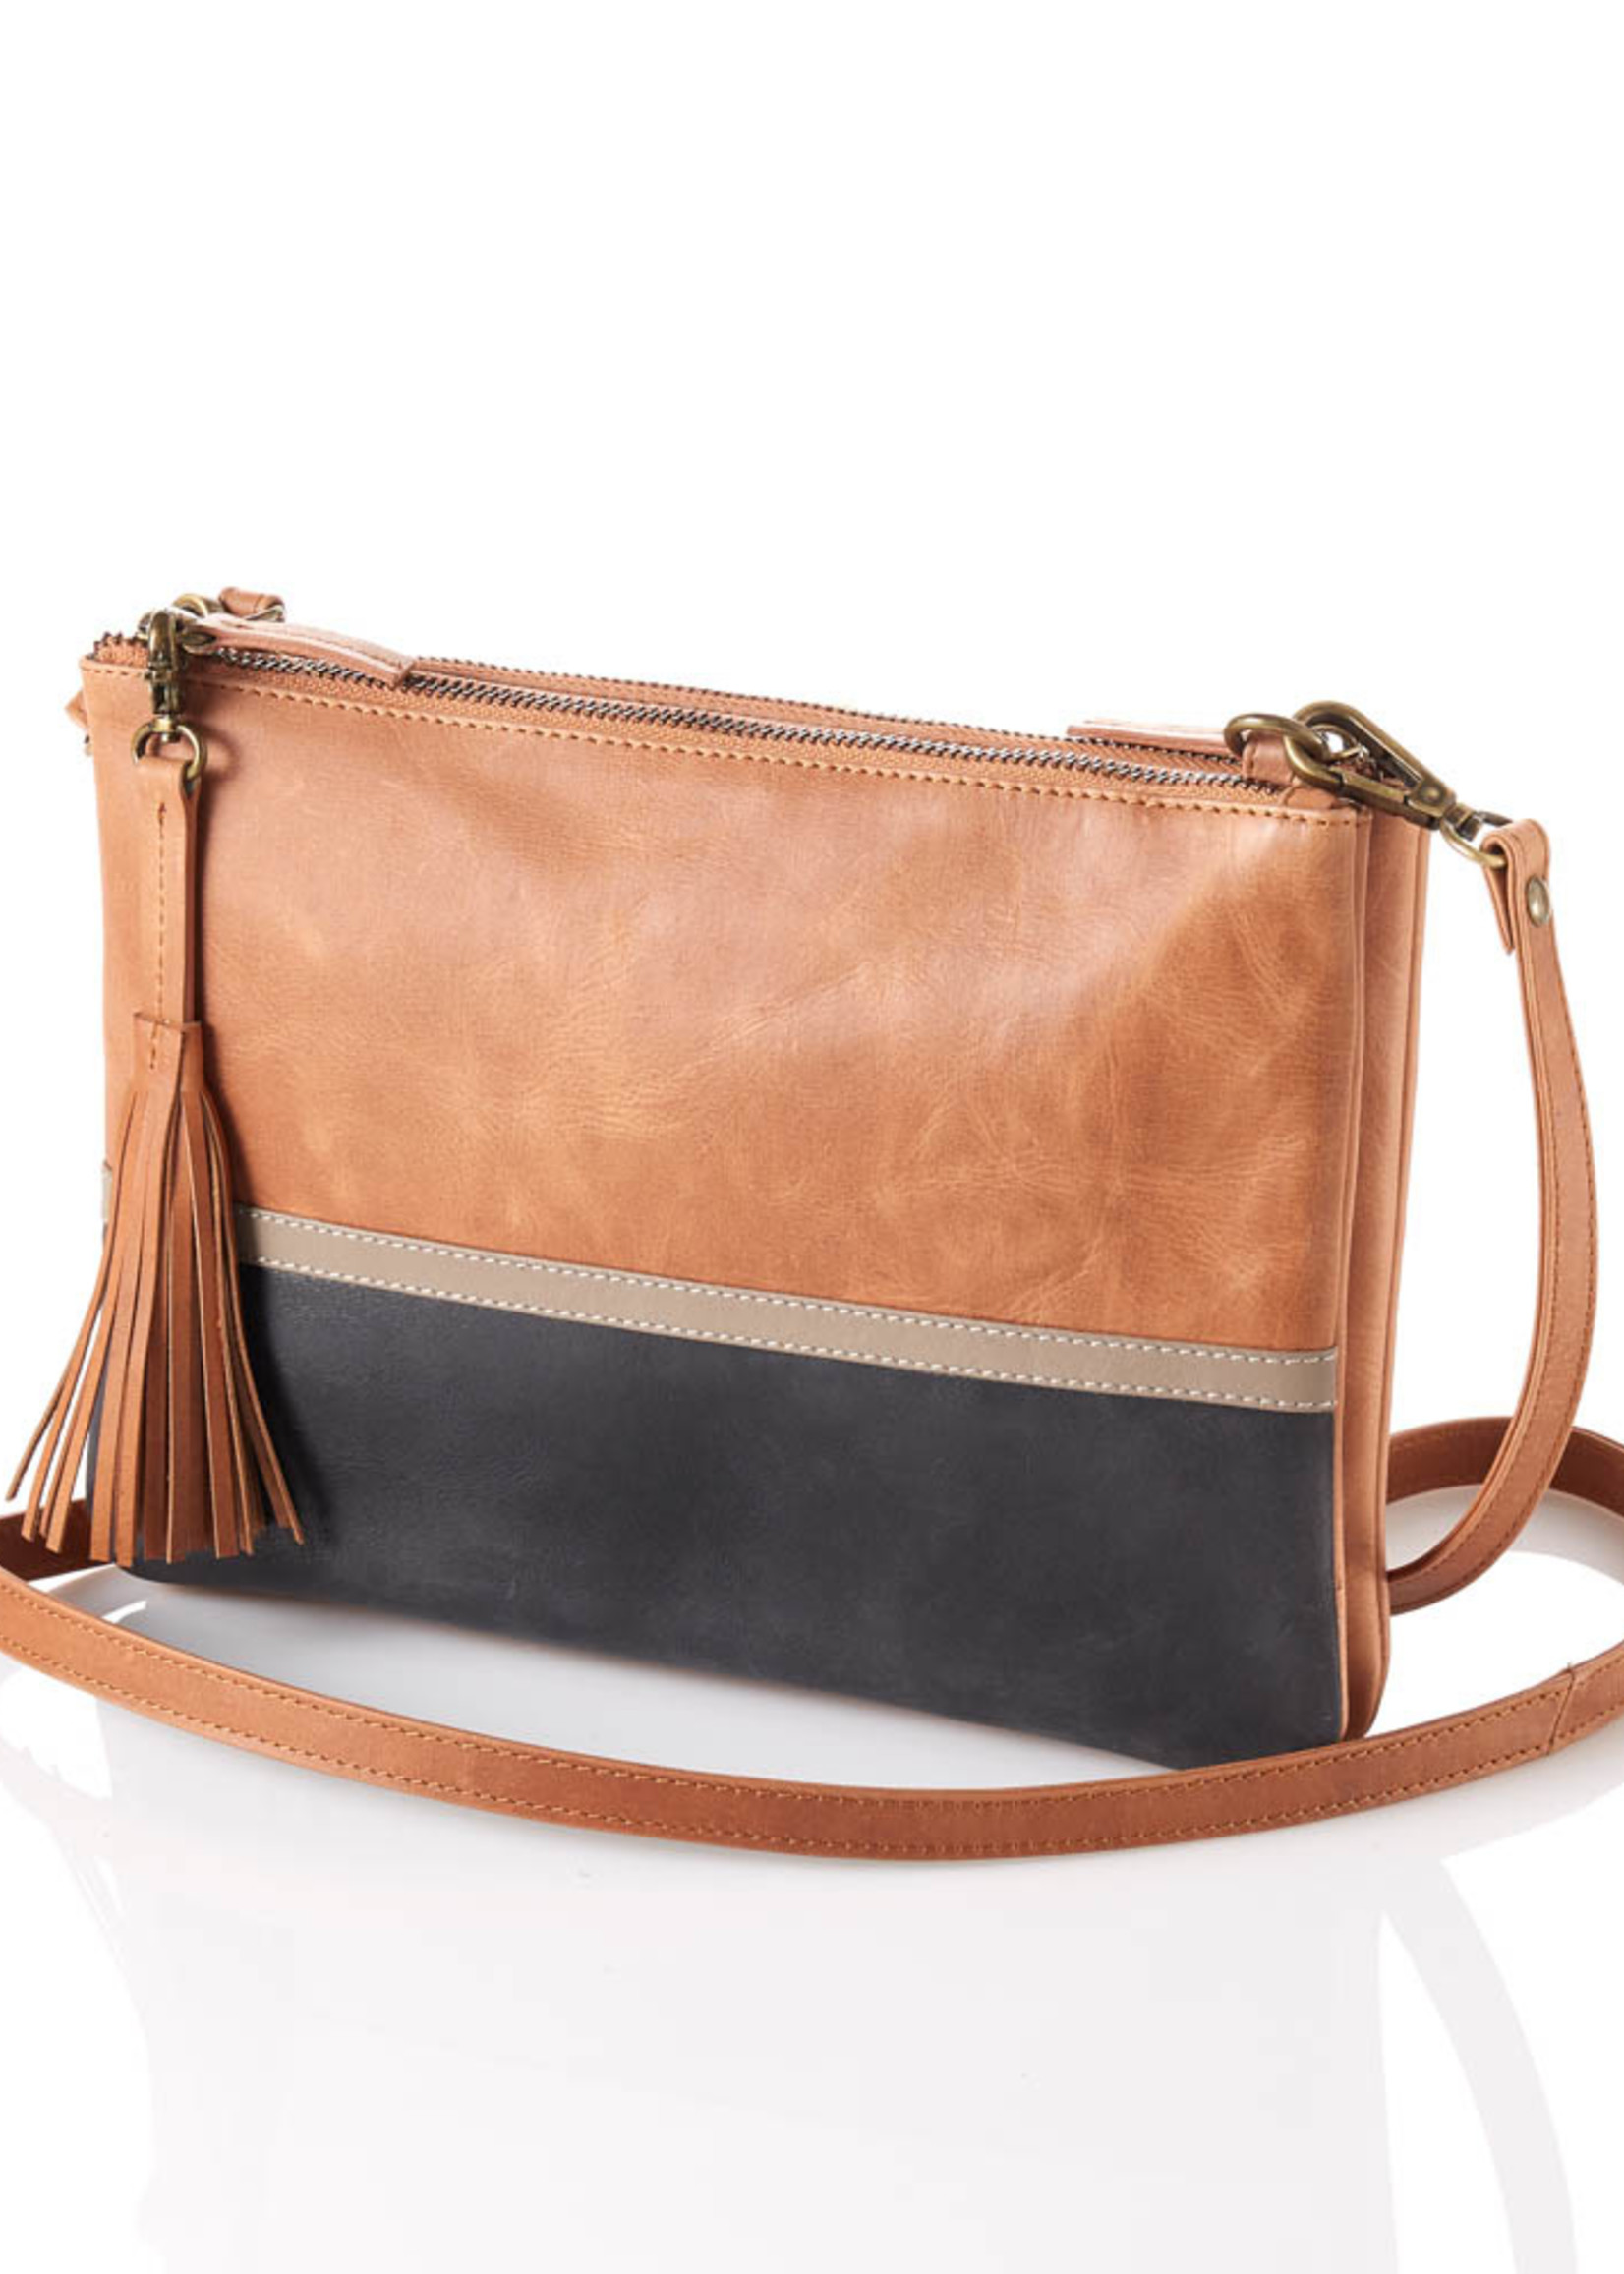 Heart Crossbody In Colorblock  Luxury purses, Brown leather